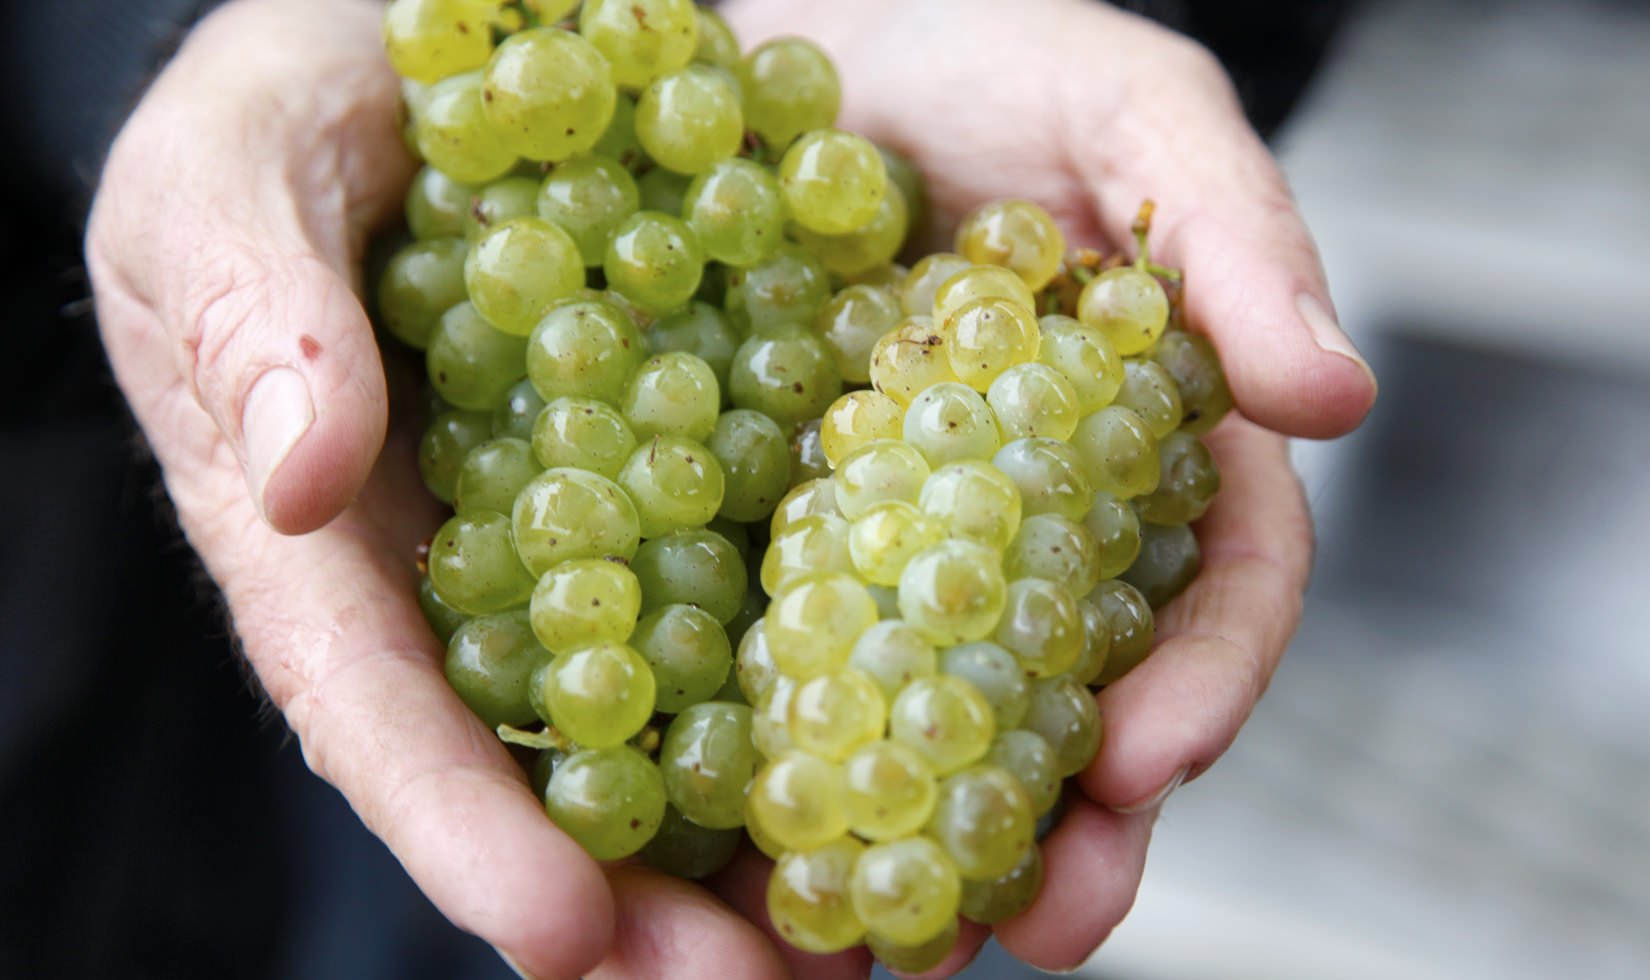 hands holding a couple clusters of Chardonnay grapes